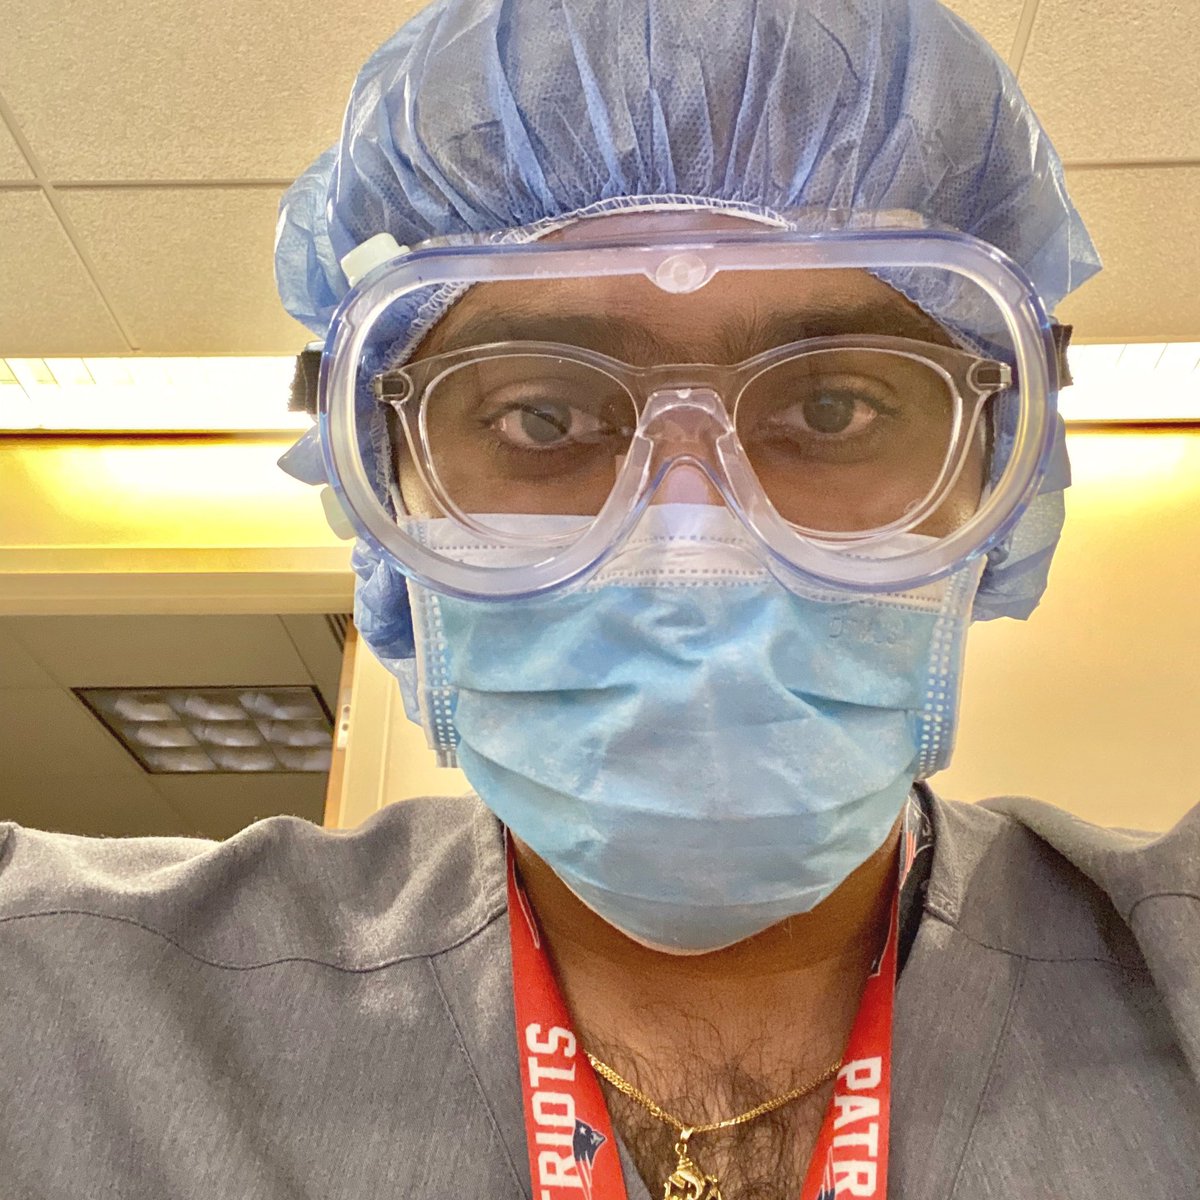 From #Telemedicine to #COVID19 ICU unit. #covid19 #covid_19 #icu #medicine #medicineresidency #connecticut #uconn #Stfrancis #ppe #residentlife💊💉🏥